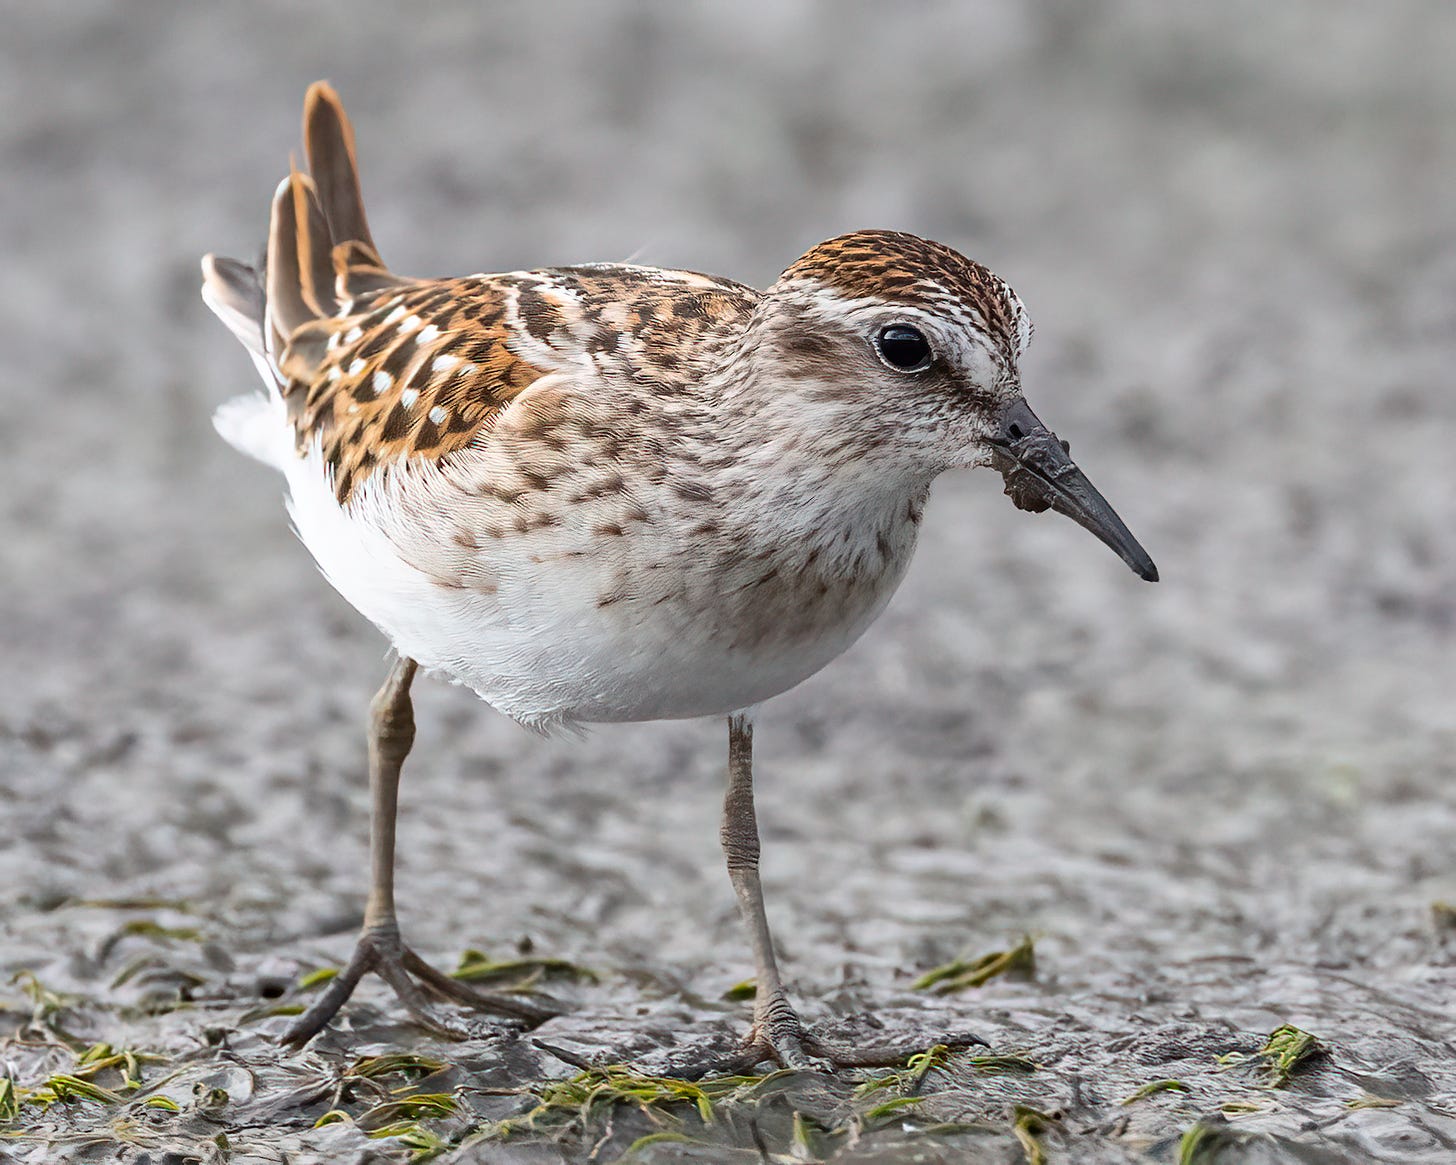 The least sandpiper is a very small bird. In this photo, he is standing on a diagonal to the photographer, looking toward the camera. He has been probing in the soil, and there's mud on his beak. His body is covered in rusty brown and black feathers, as is his head. He has a white stripe above his eye.